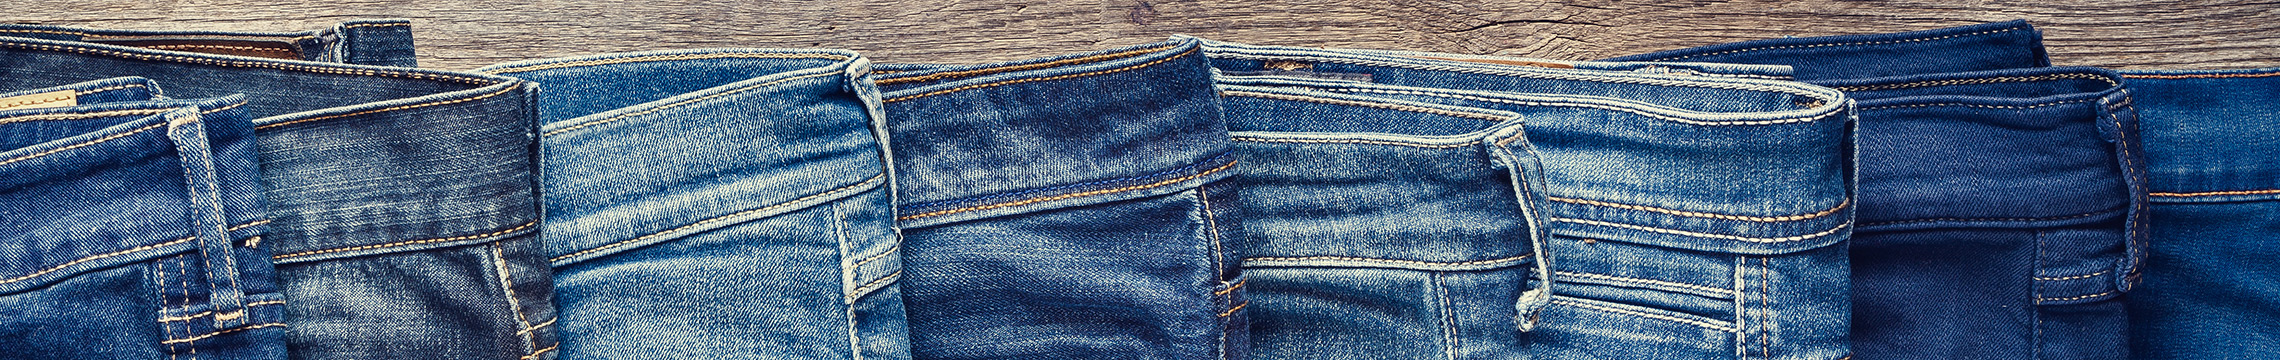 Men's blue jeans fanned out across a wood table